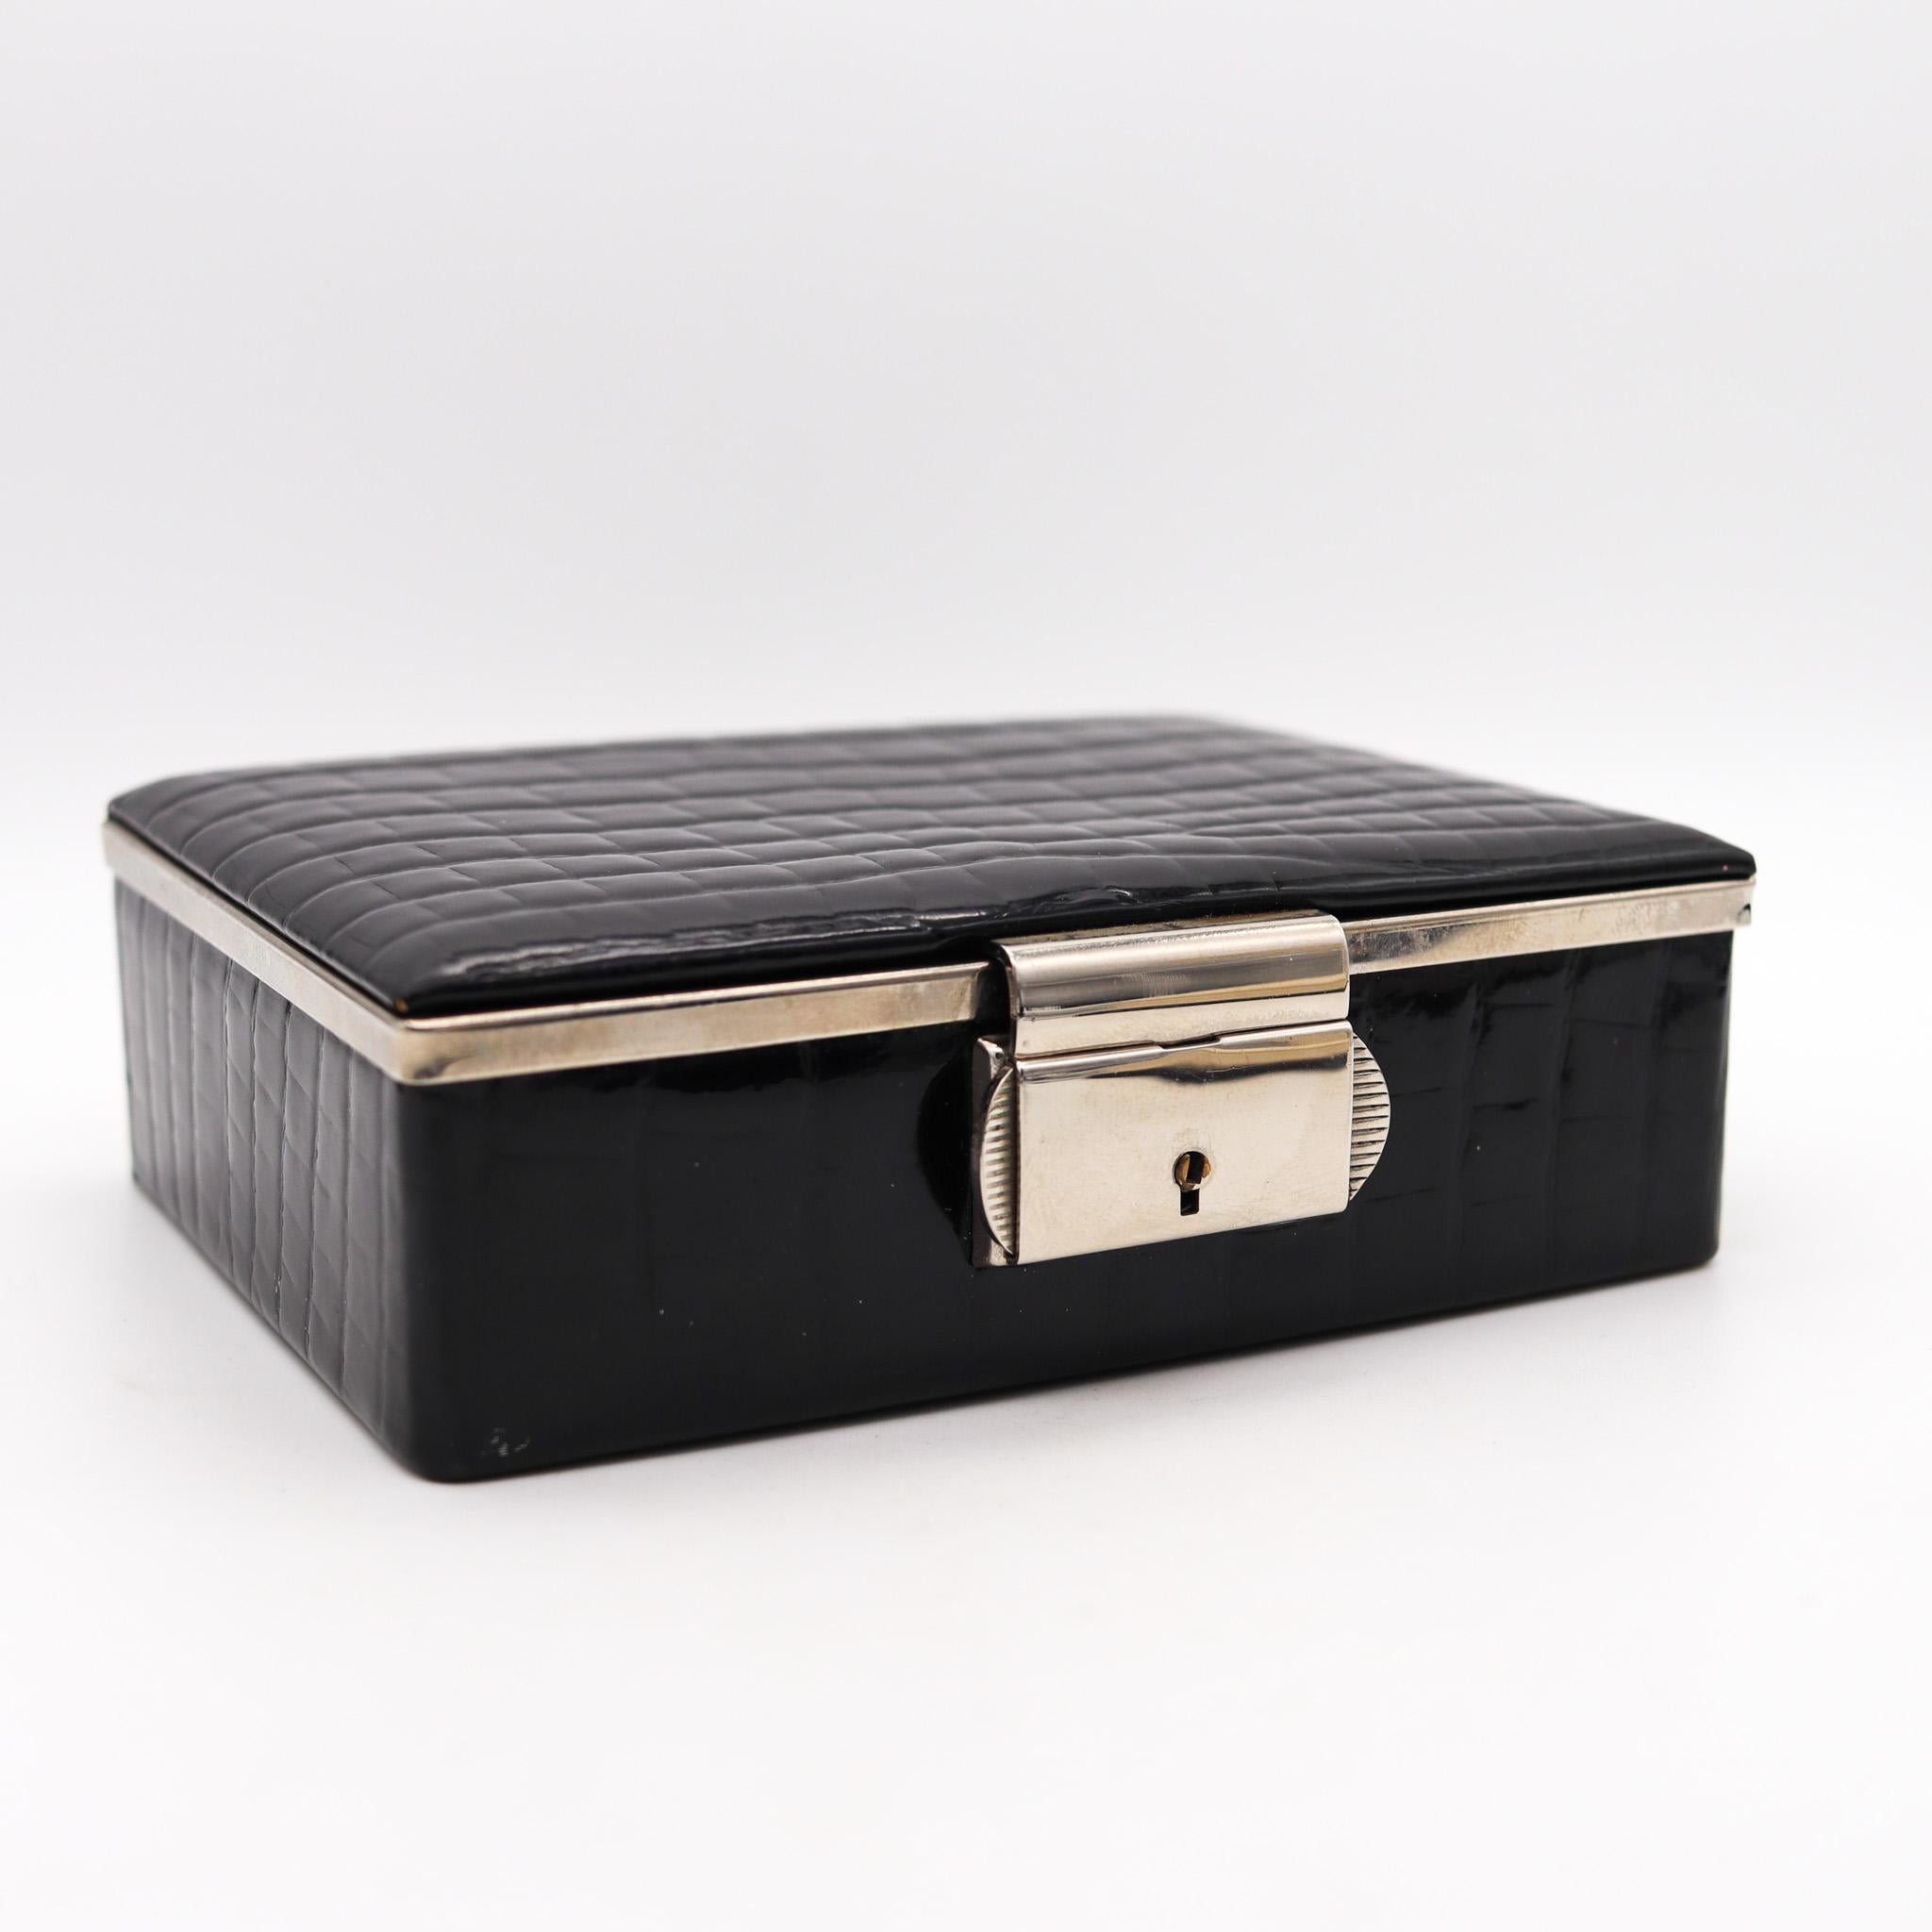 Desk box designed by Dunhill.

Beautiful decorative vintage desk box, created in Germany for Alfred Dunhill, back in the 1990. It was made up in shiny black leather with a discrete frame in chromed steel. The inside is lined up with gray fabric.